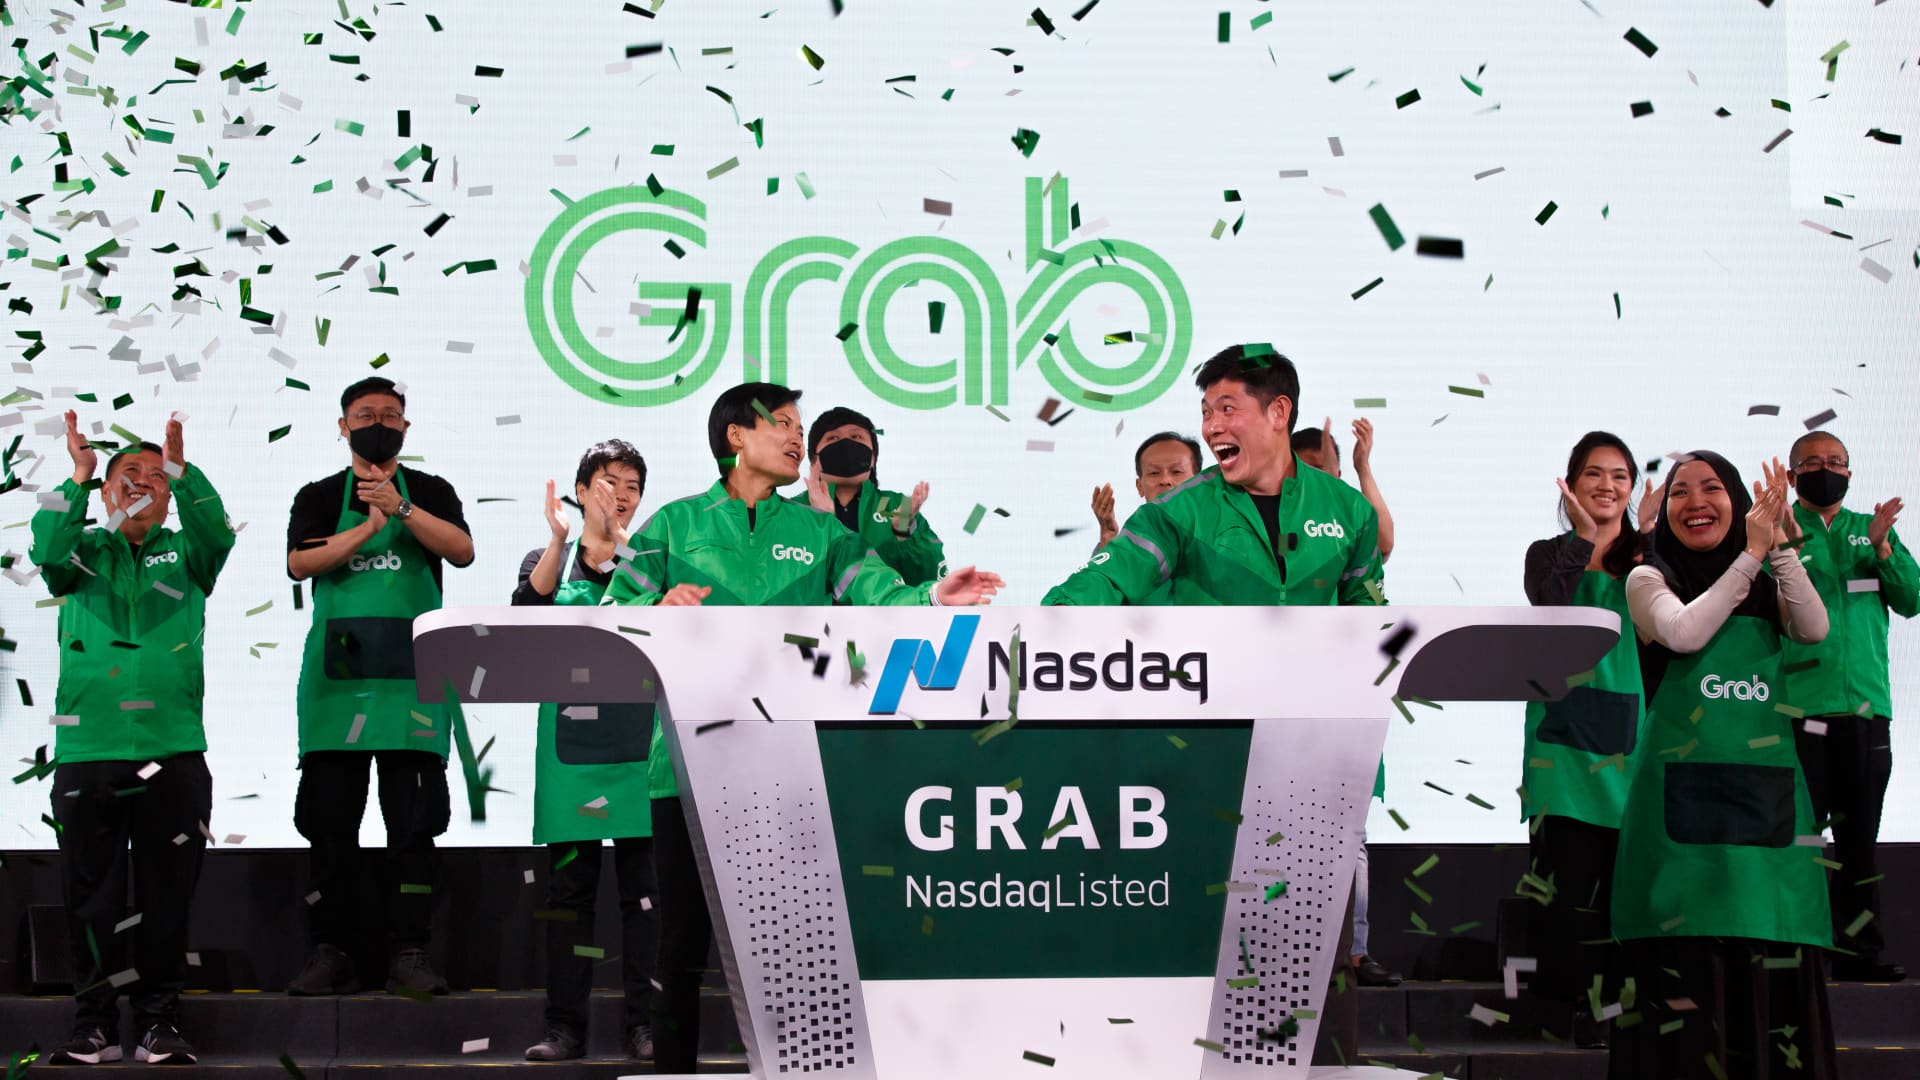 Anthony Tan, chief executive officer of Grab Holdings Inc., center right, and Tan Hooi Ling, co-founder of Grab Holdings Inc., celebrate on stage during a bell-ringing ceremony as Grab begins trading on the Nasdaq, in Singapore, on Thursday, Dec. 2, 2021.